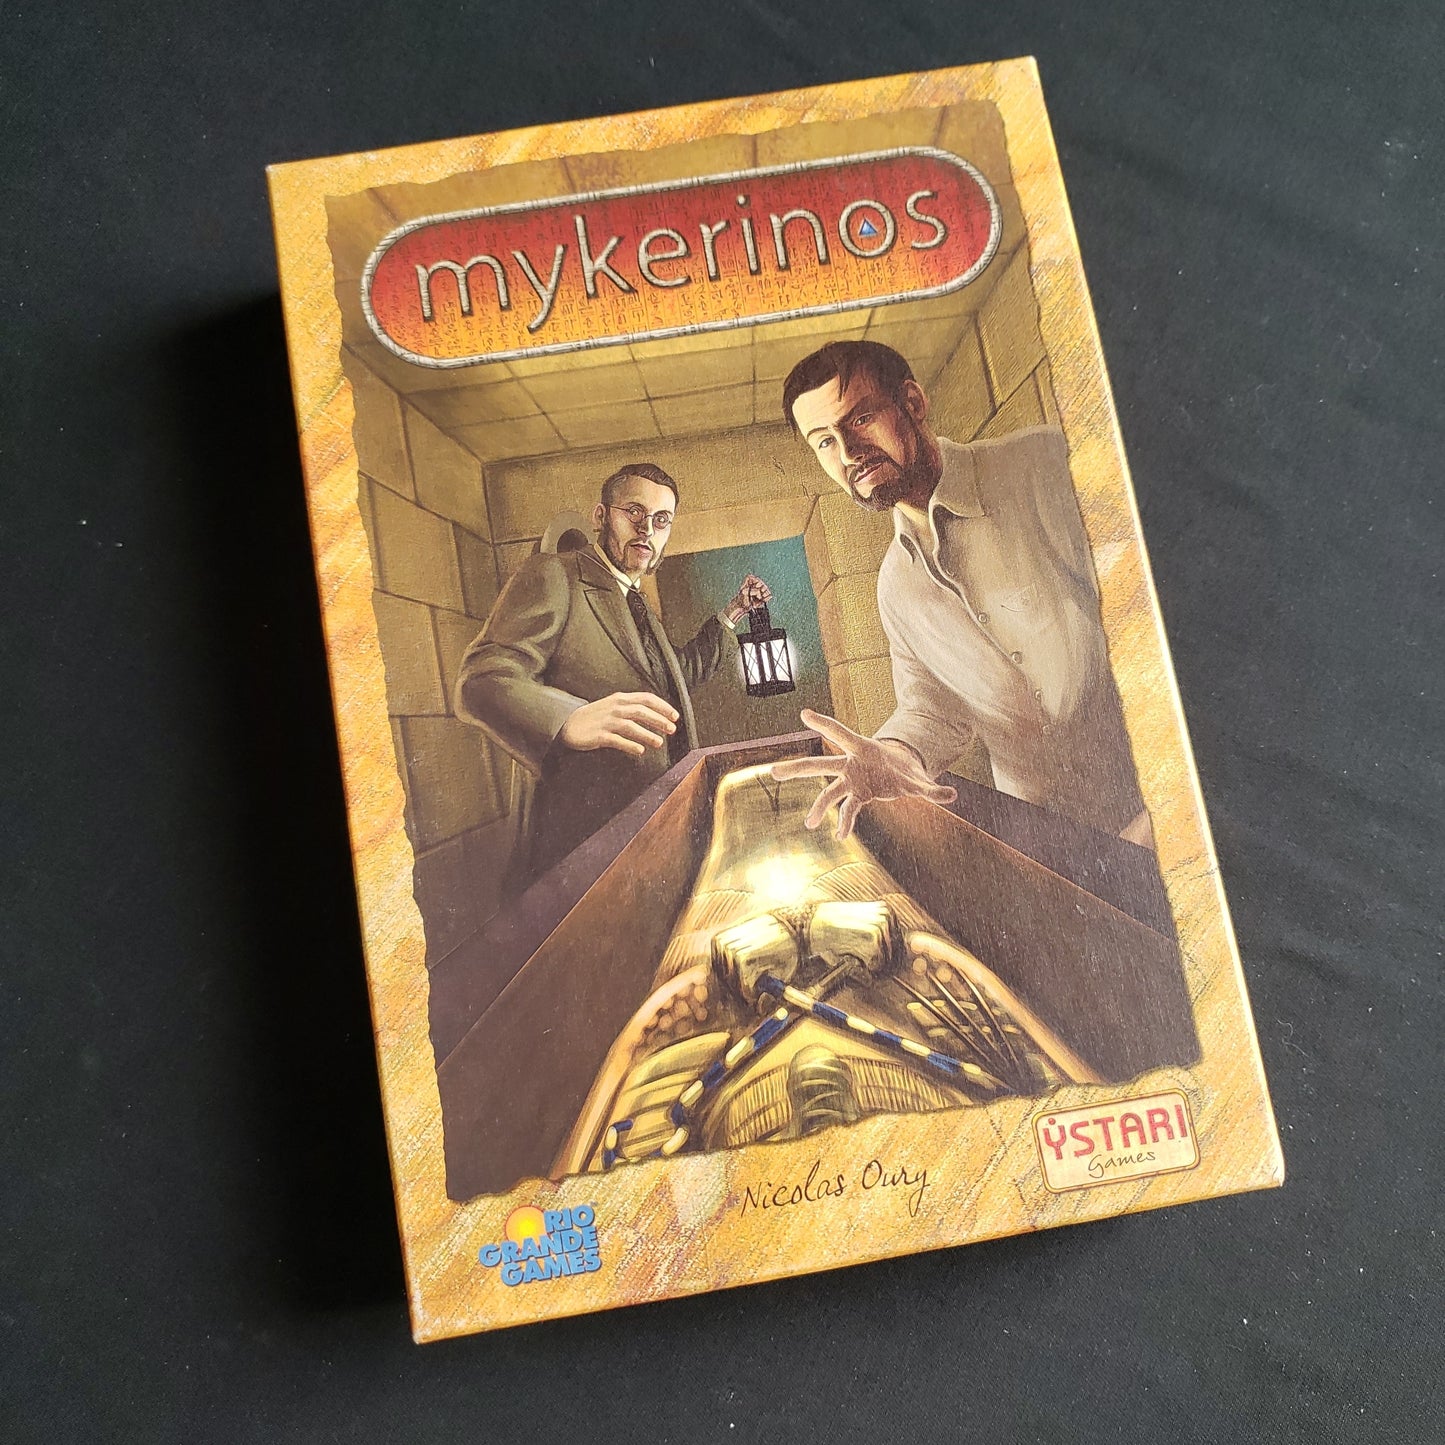 Image shows the front cover of the box of the Mykerinos board game